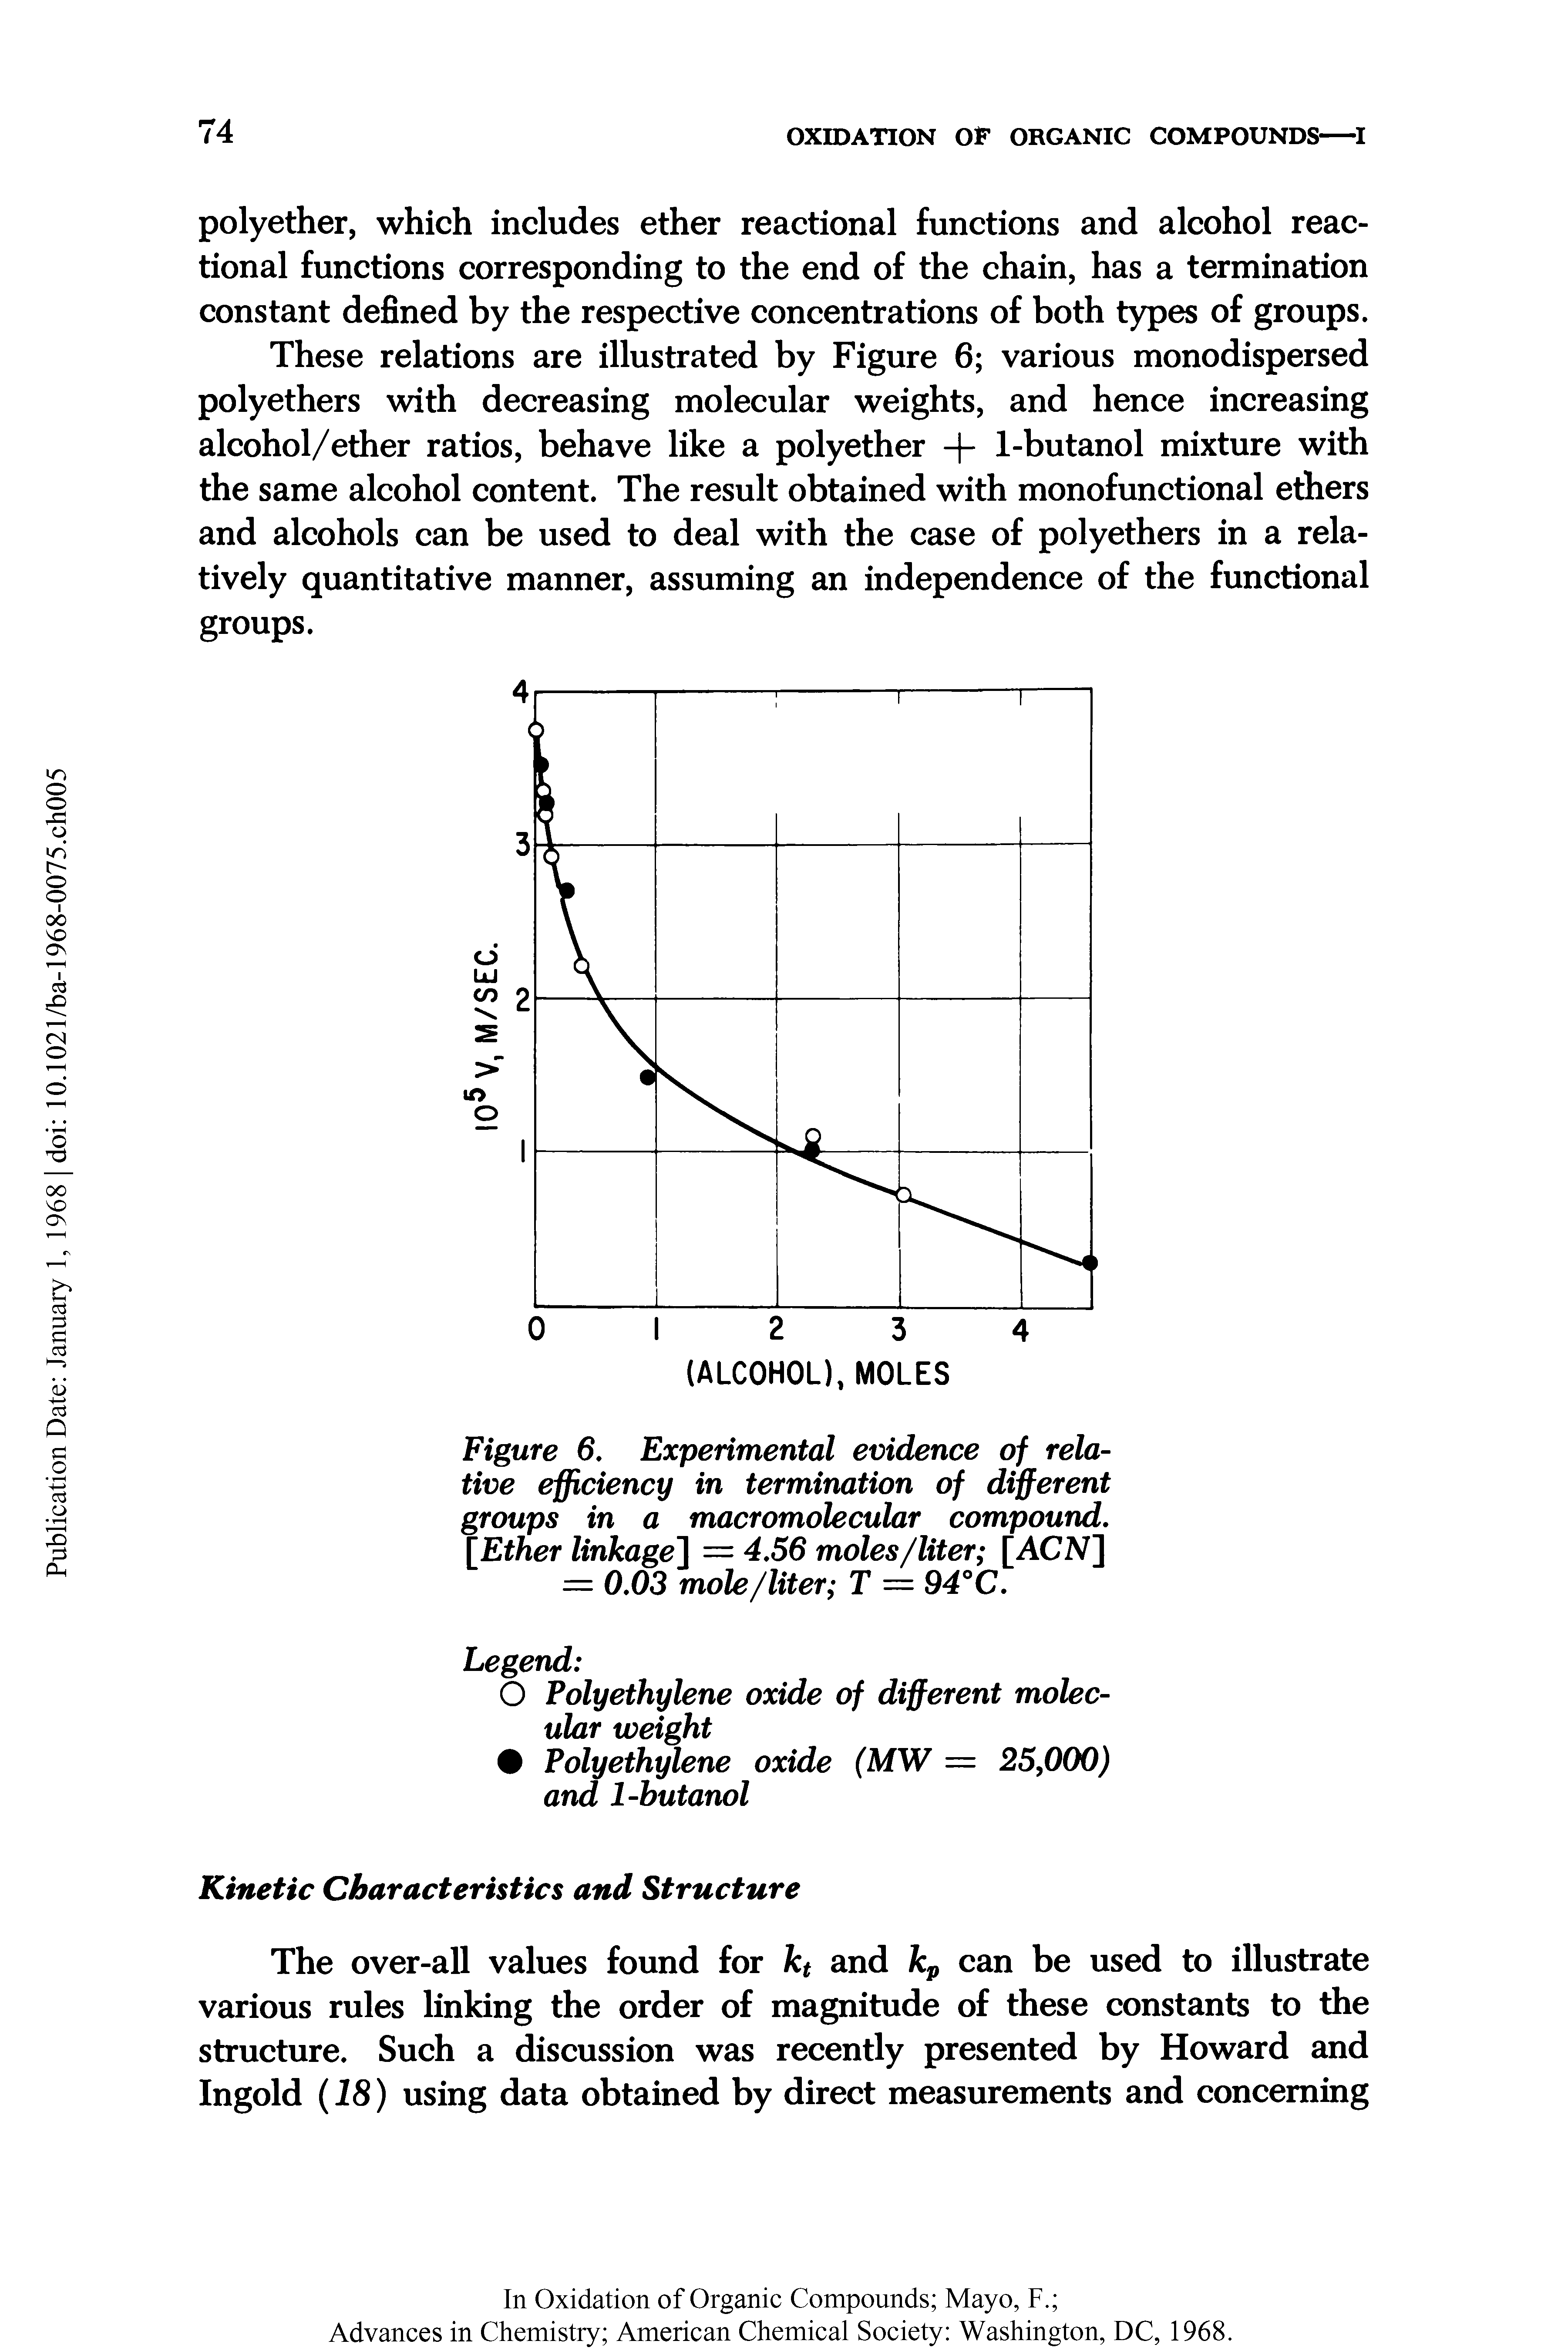 Figure 6. Experimental evidence of relative efficiency in termination of different groups in a macromolecular compound. [Ether linkage ] — 4.56 moles/liter [ACN] = 0.03 mole/liter T = 94°C.